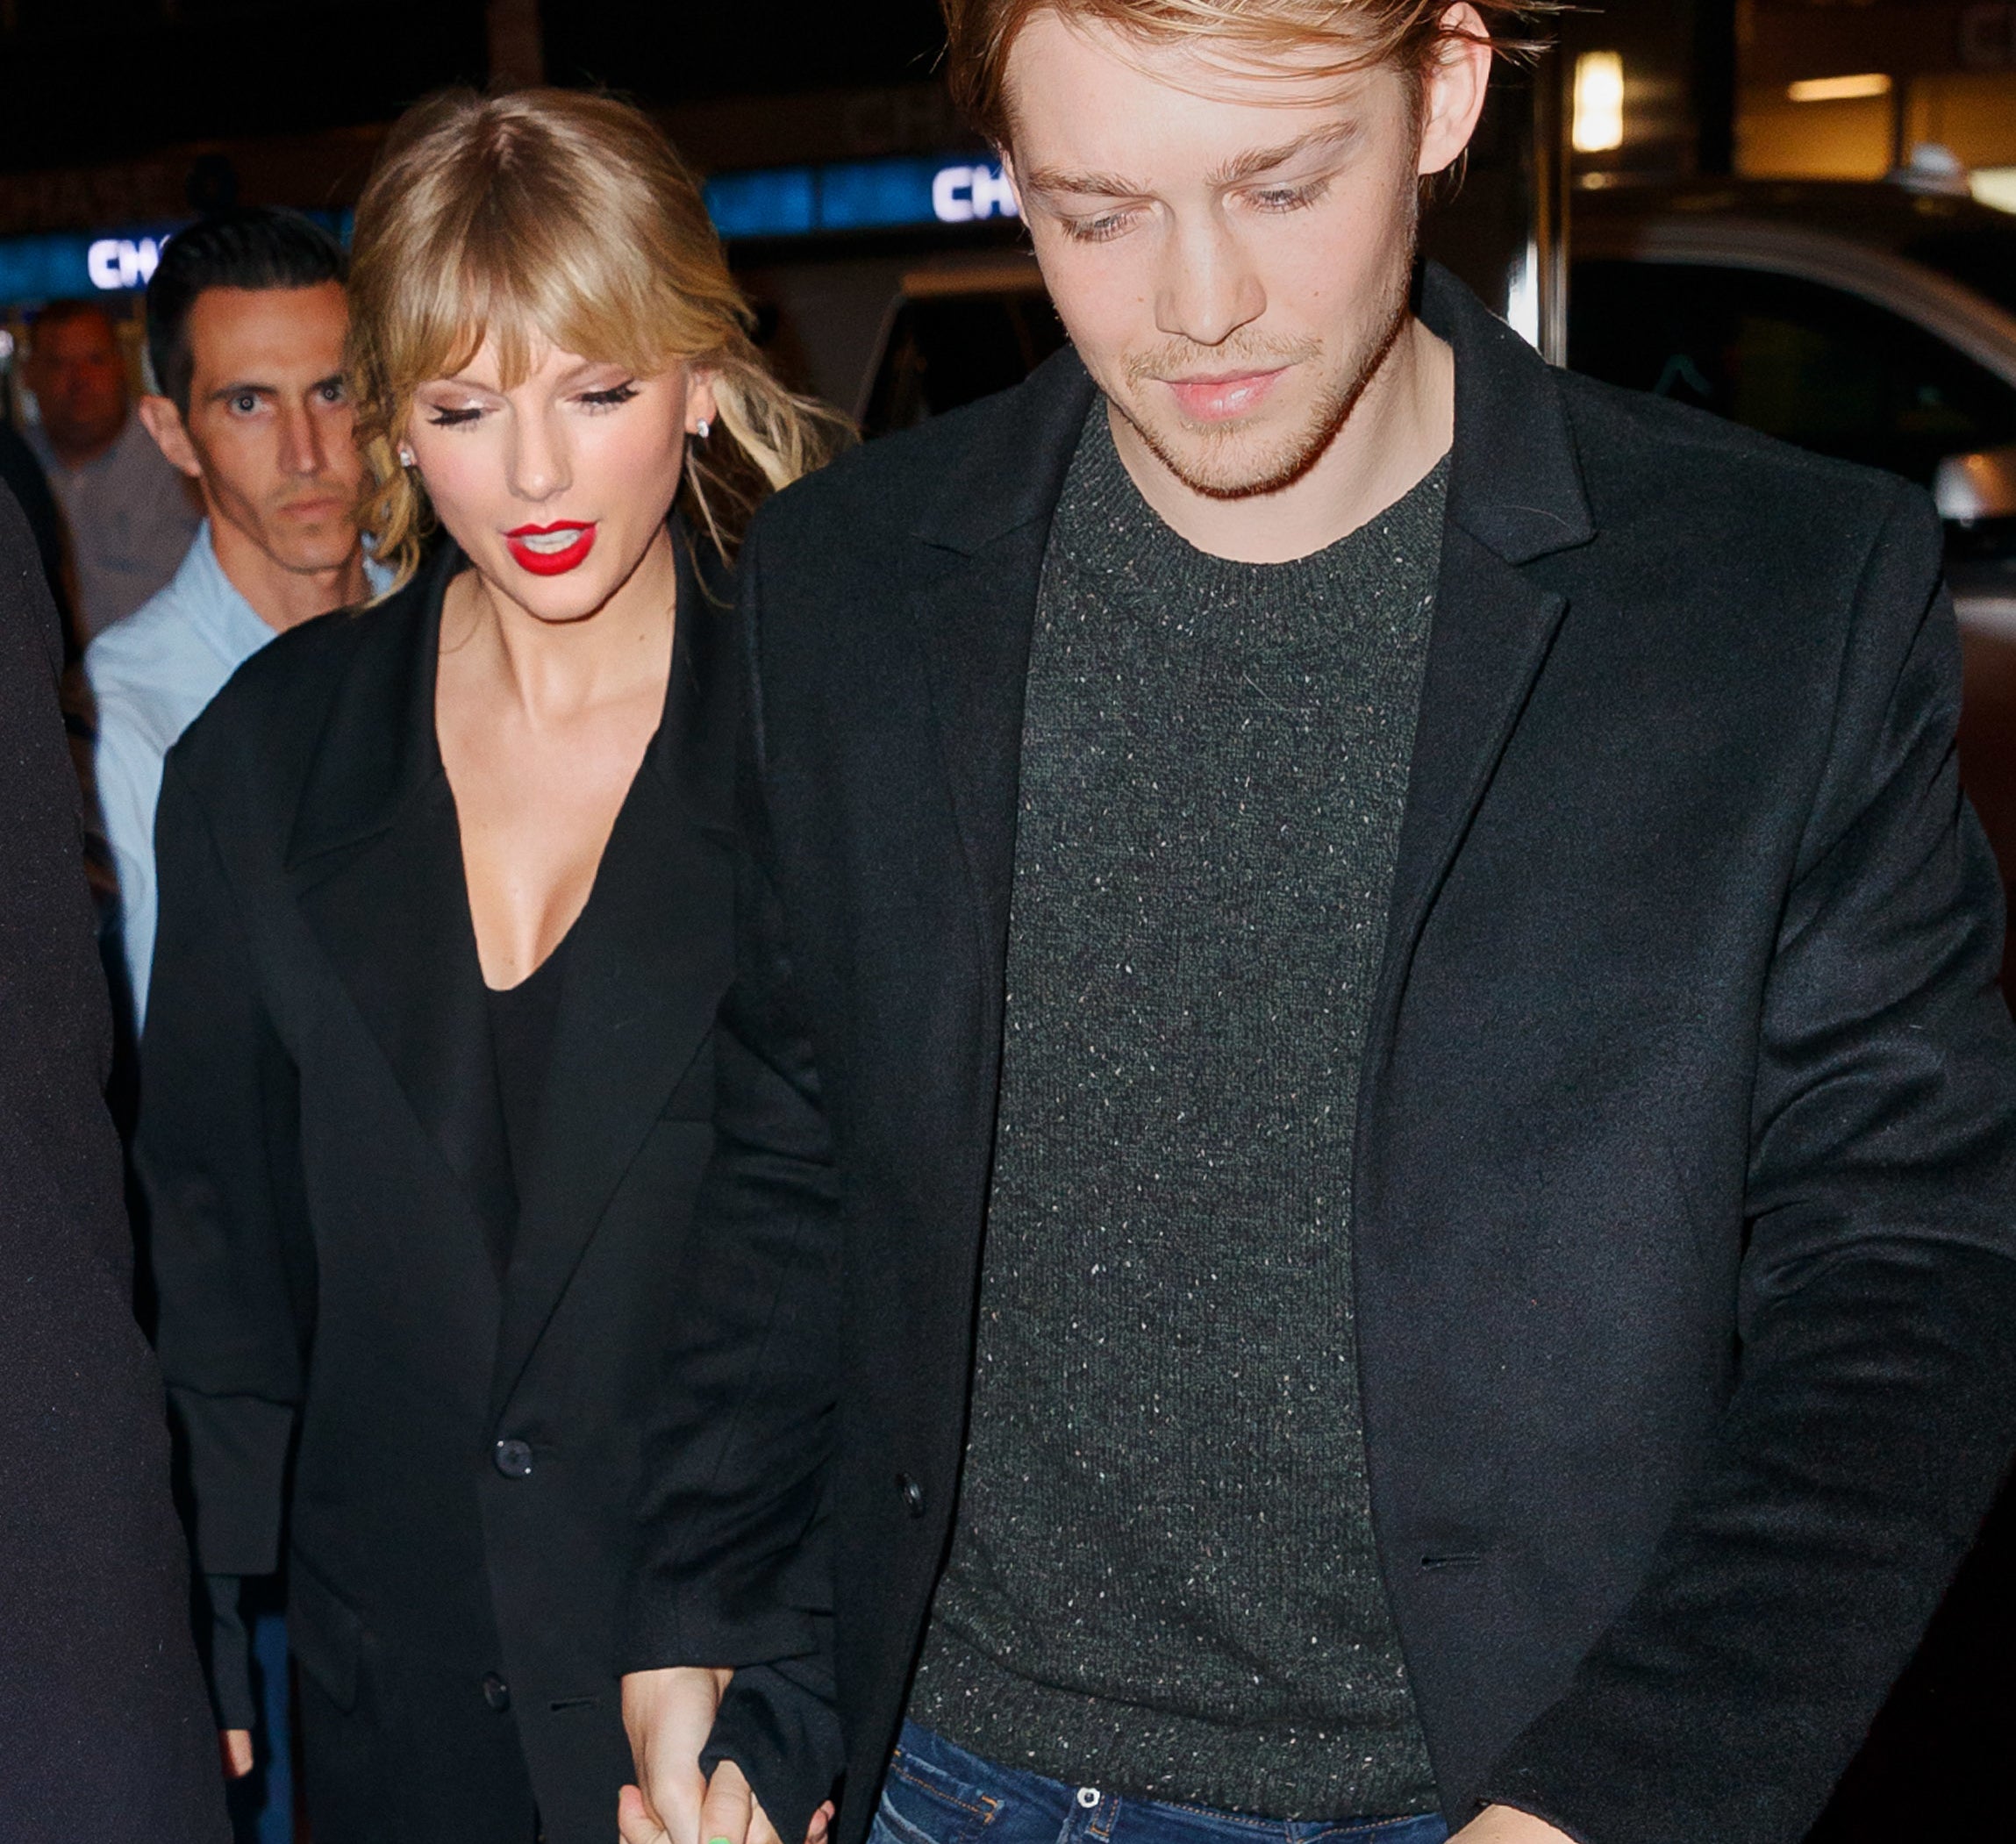 Taylor Swift and Joe Alwyn are holding hands, walking together. Taylor is wearing a blazer and patterned pants. Joe is wearing a dark coat and jeans